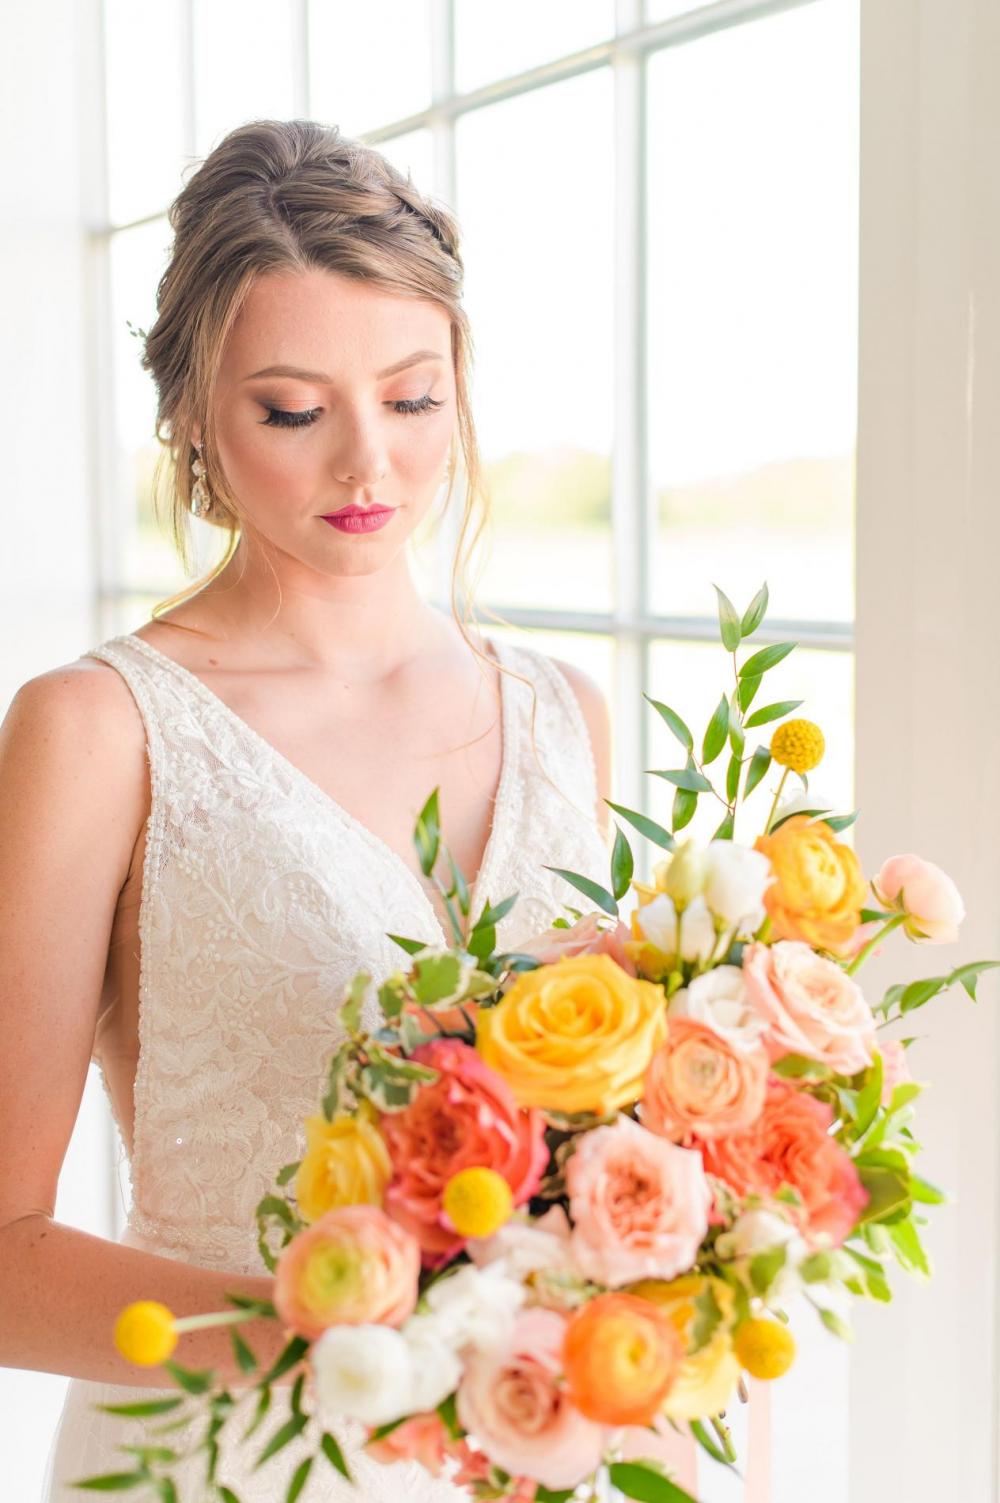 Jump in to Summer Colors in this Bold Citrus-Inspired Style Shoot ...